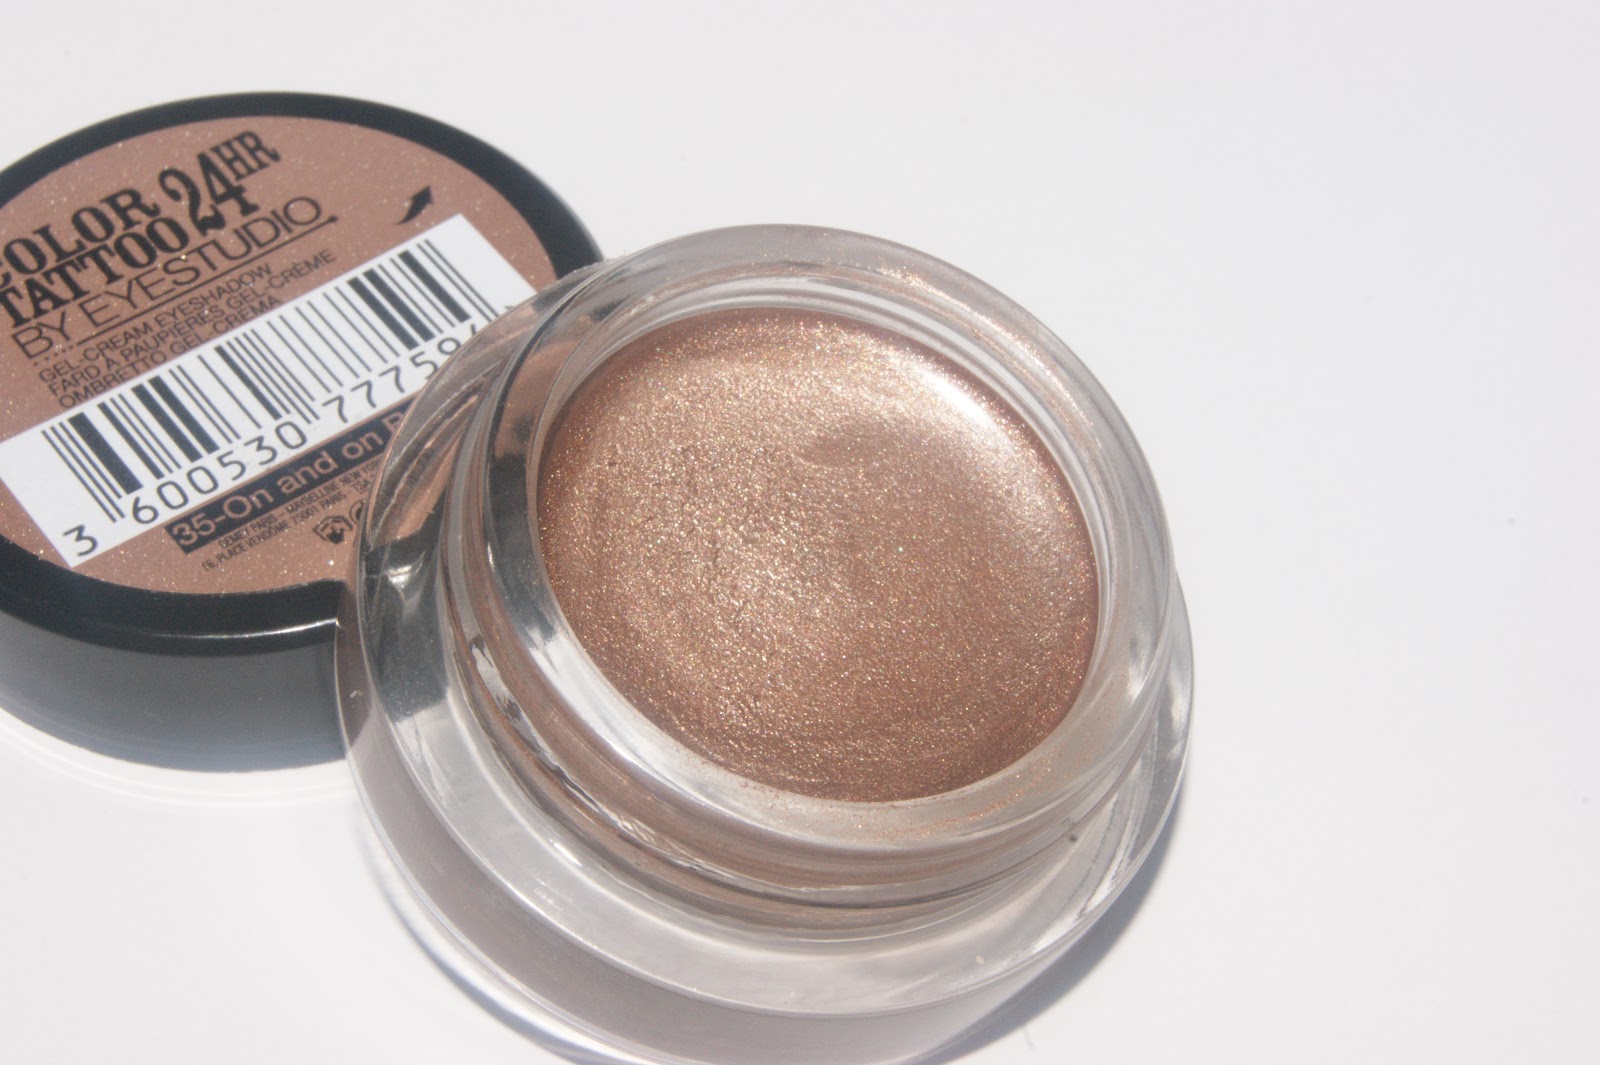 Color Tattoo 24hr Eyeshadow in On and On Bronze - Review | The Sunday Girl